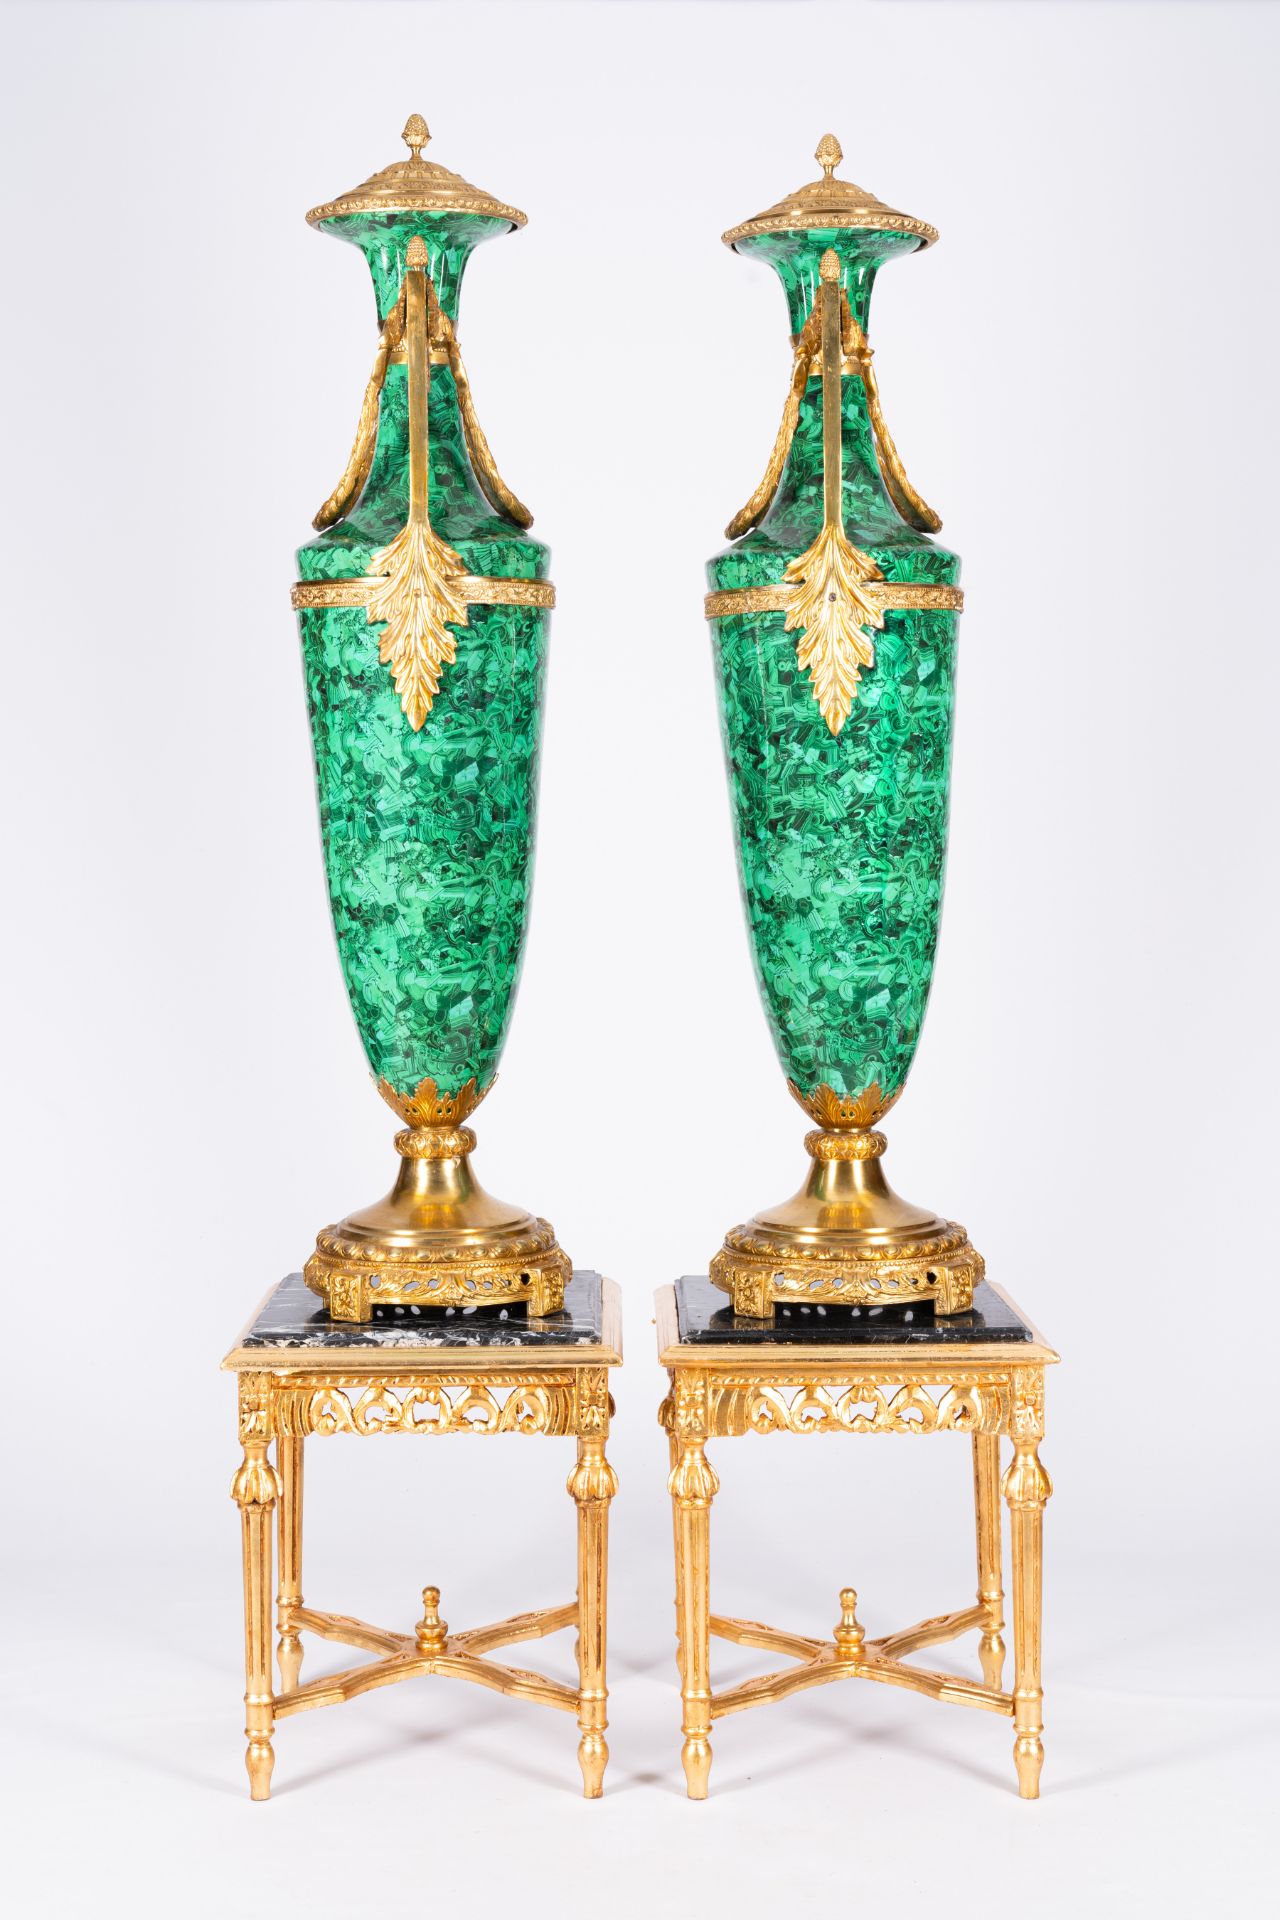 A pair of large gilt bronze mounted faux-malachite vases on matching gilt wood bases with marble top - Image 4 of 4